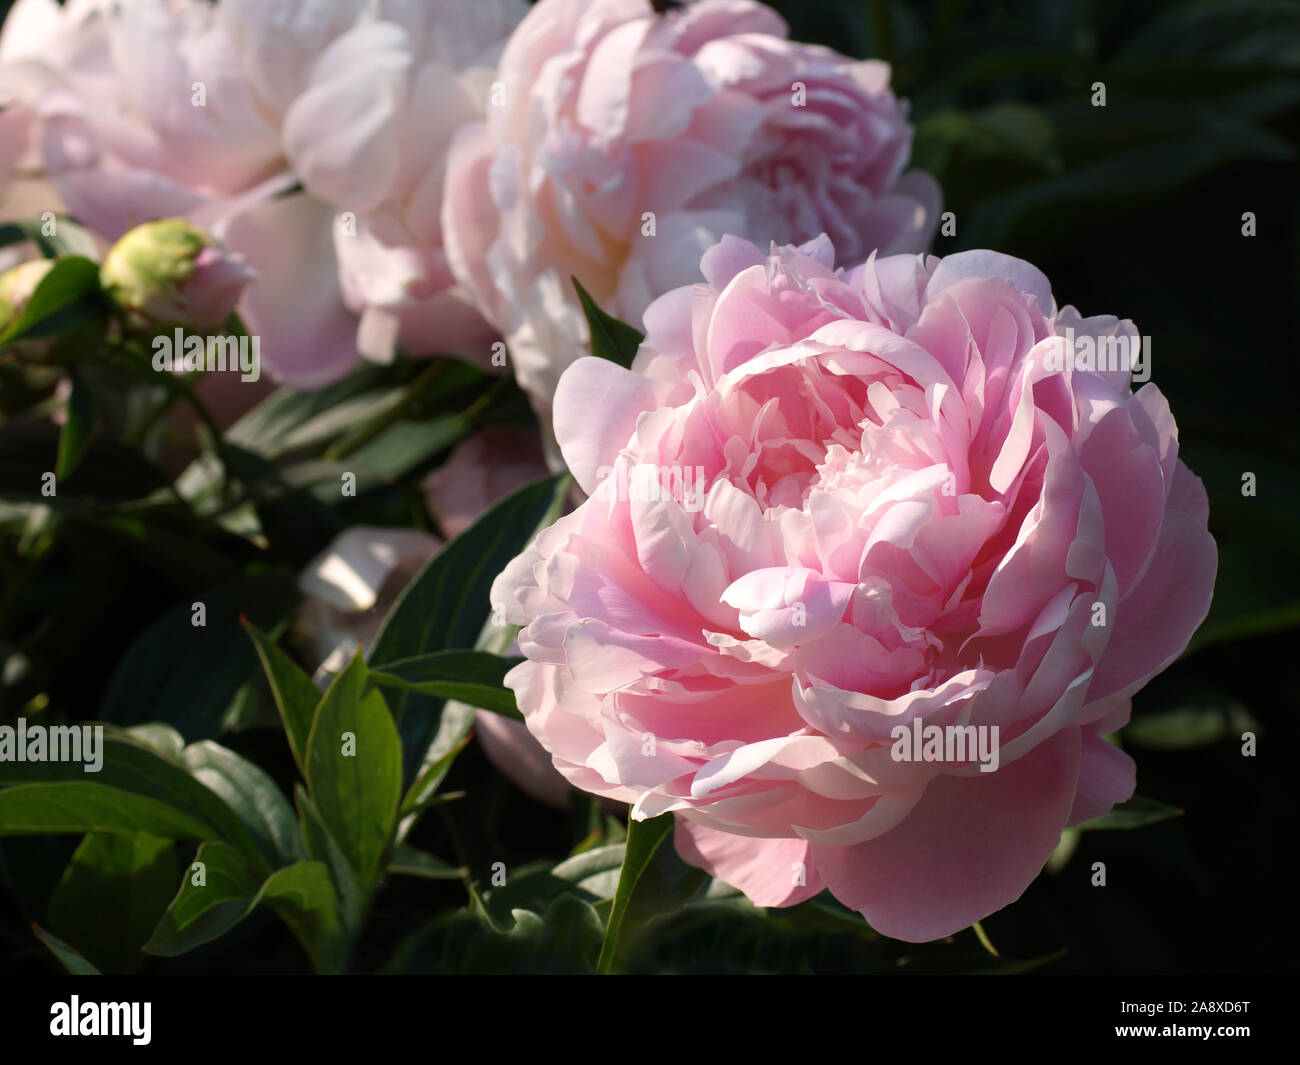 Peony Mrs. Franklin D. Roosevelt.  Double pink peony flower. Paeonia lactiflora (Chinese peony or common garden peony). Stock Photo